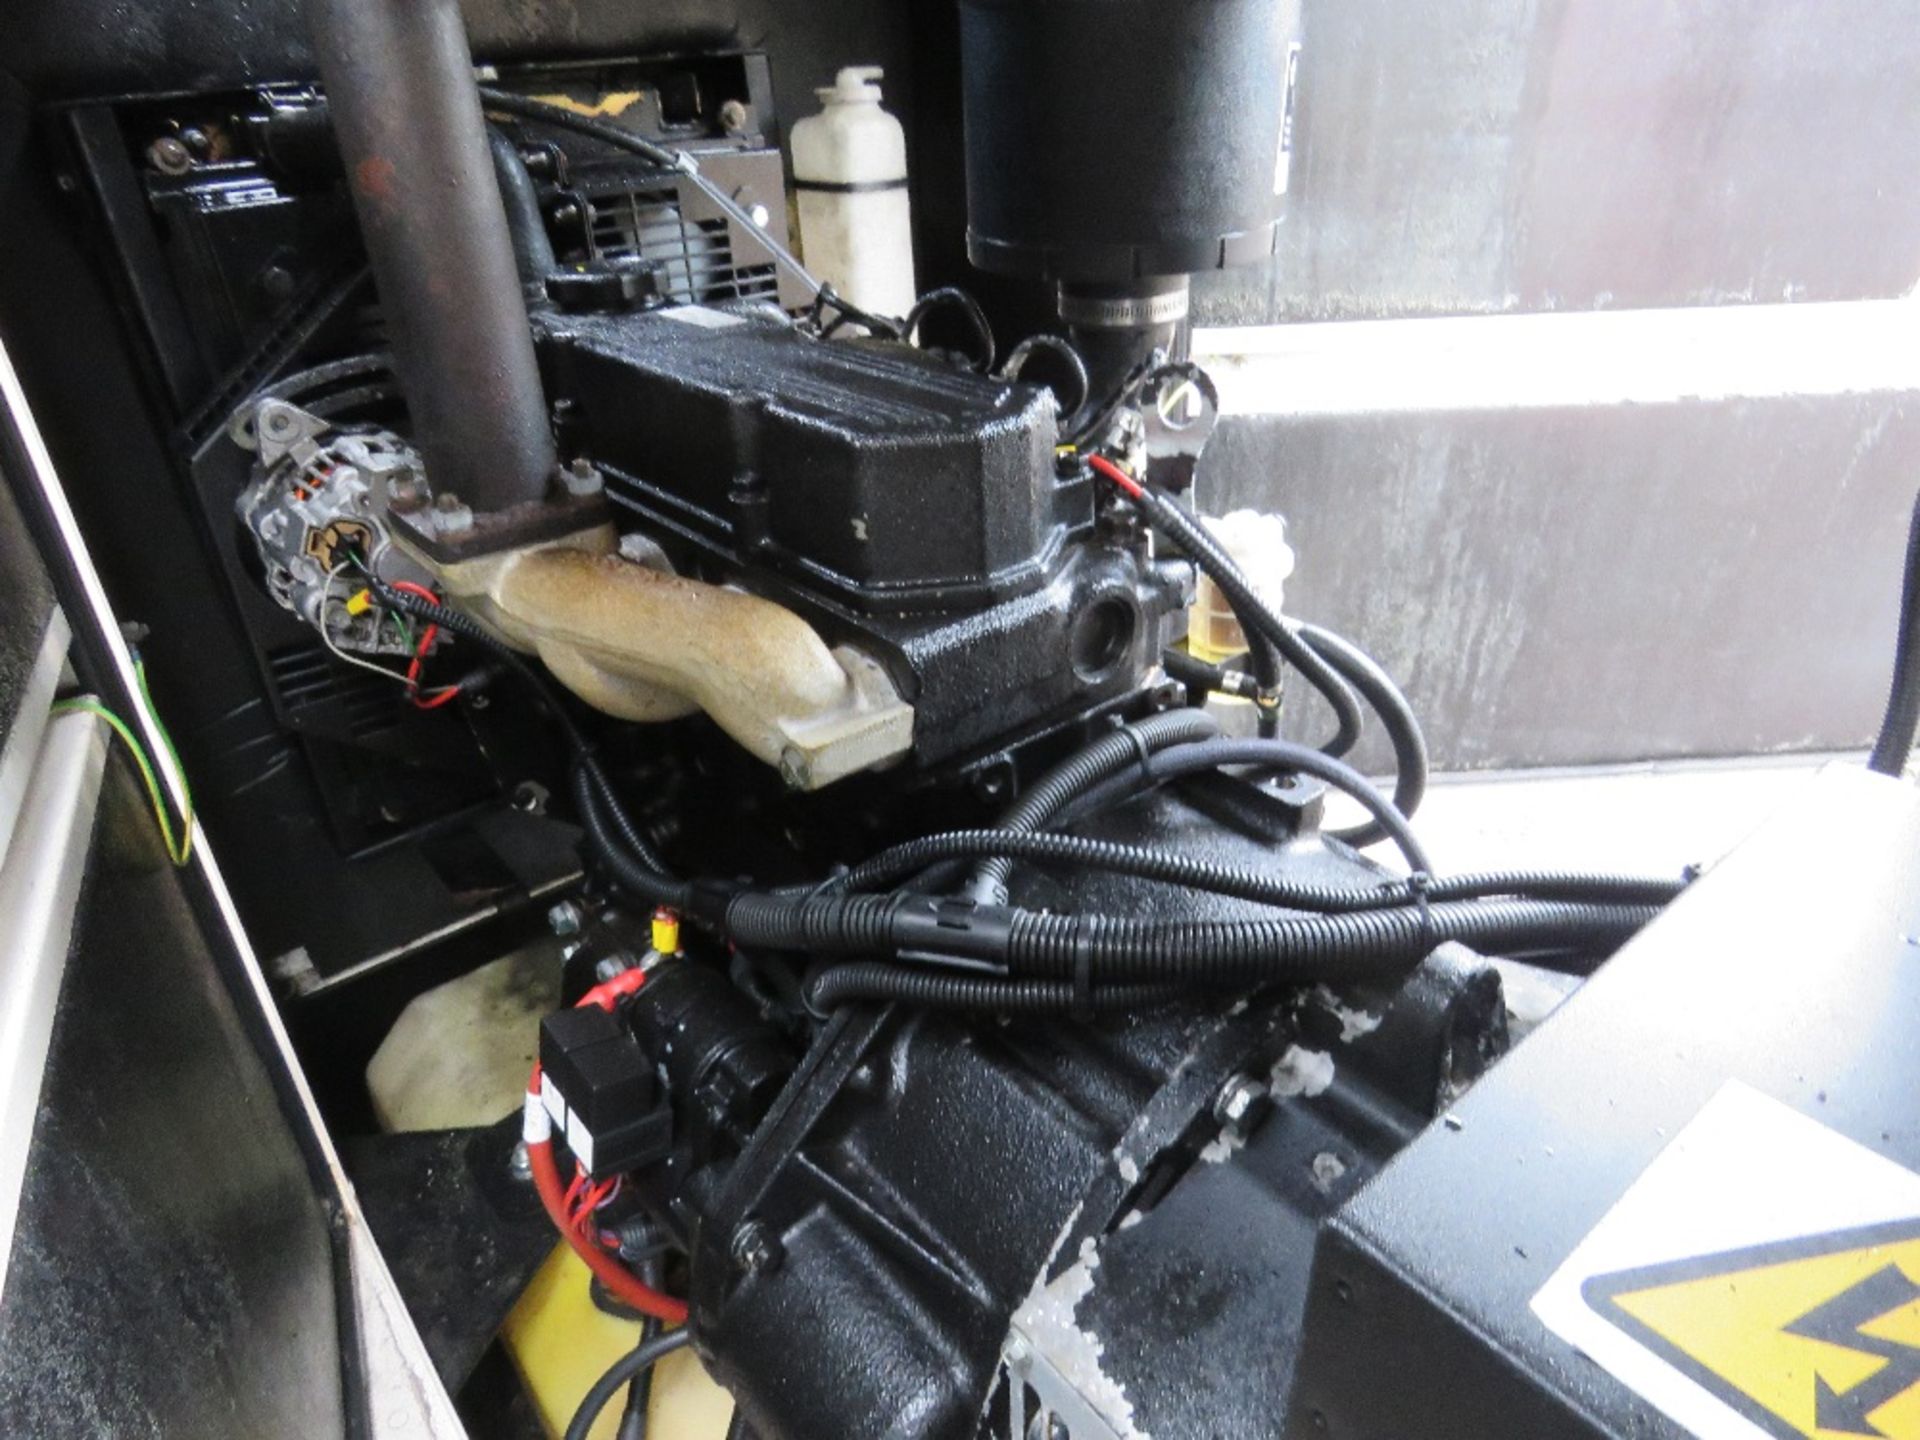 JCB 11KVA SKID MOUNTED SILENCED GENERATOR, SINGLE PHASE 240V OUTPUT, 2016 BUILD. SOURCED FROM MAJOR - Image 4 of 5